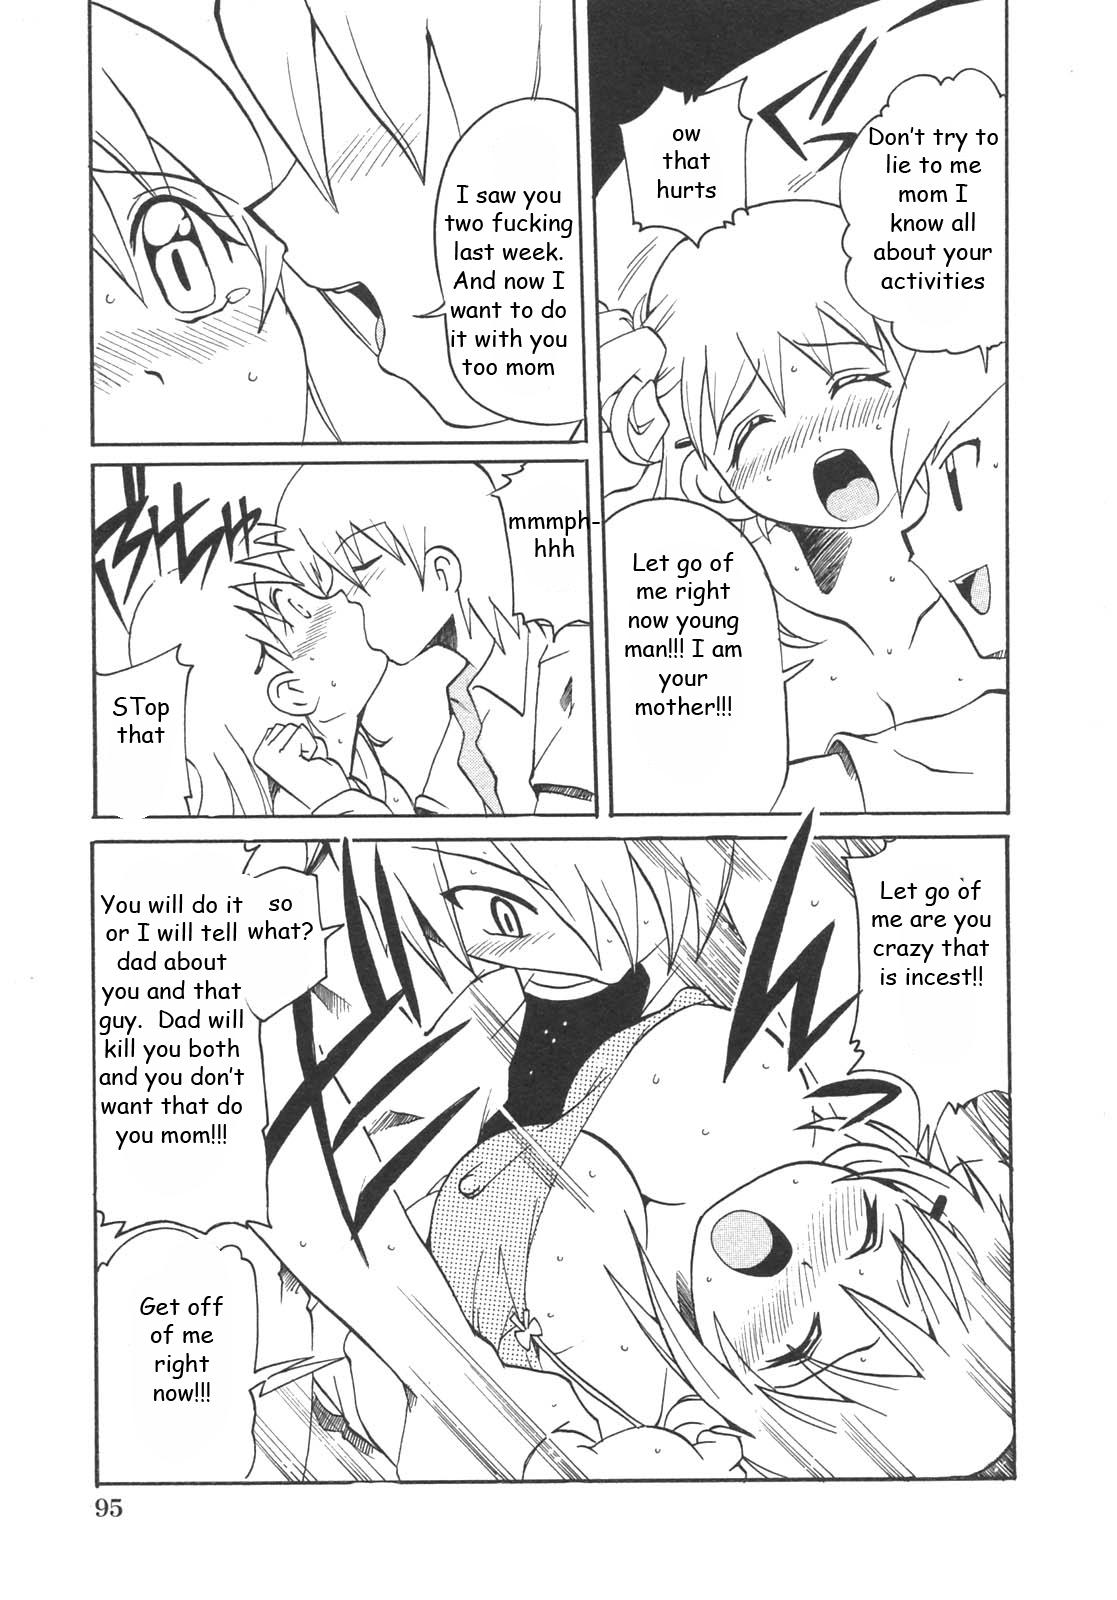 Furry Punishing Mommy Aussie - Page 3